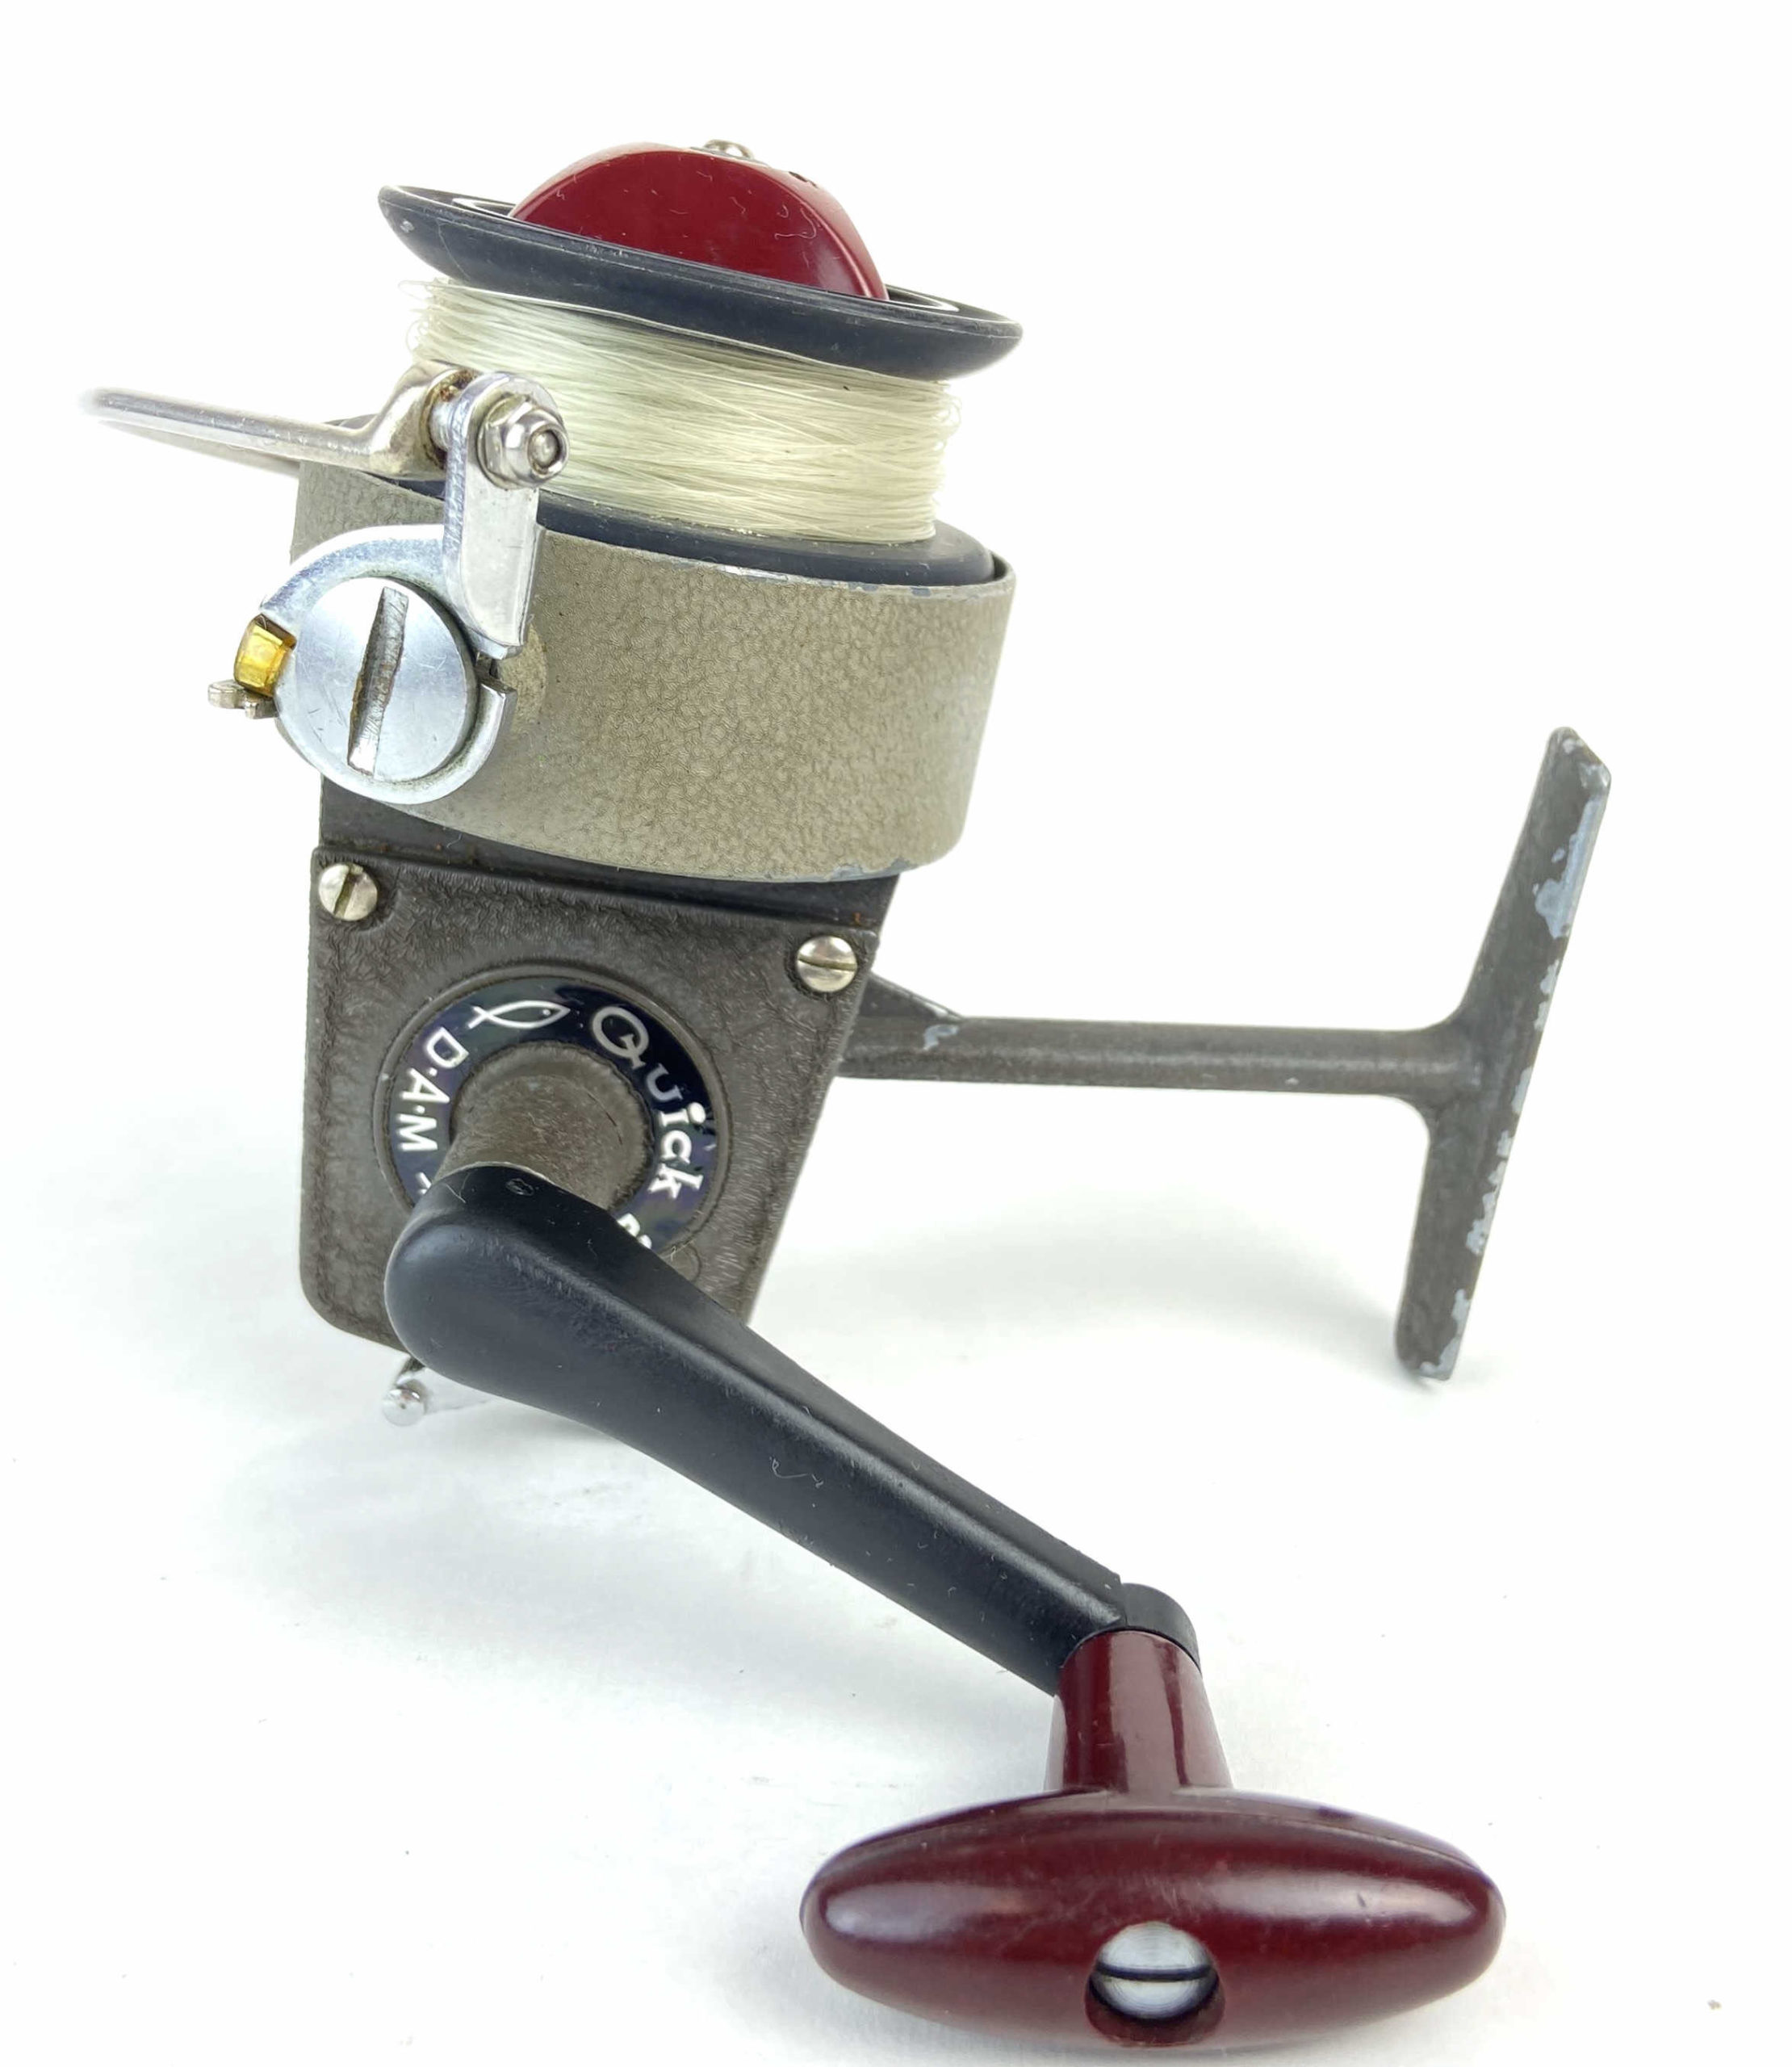 Sold at Auction: 3 VINTAGE OPEN FACE SPINNING FISHING REELS